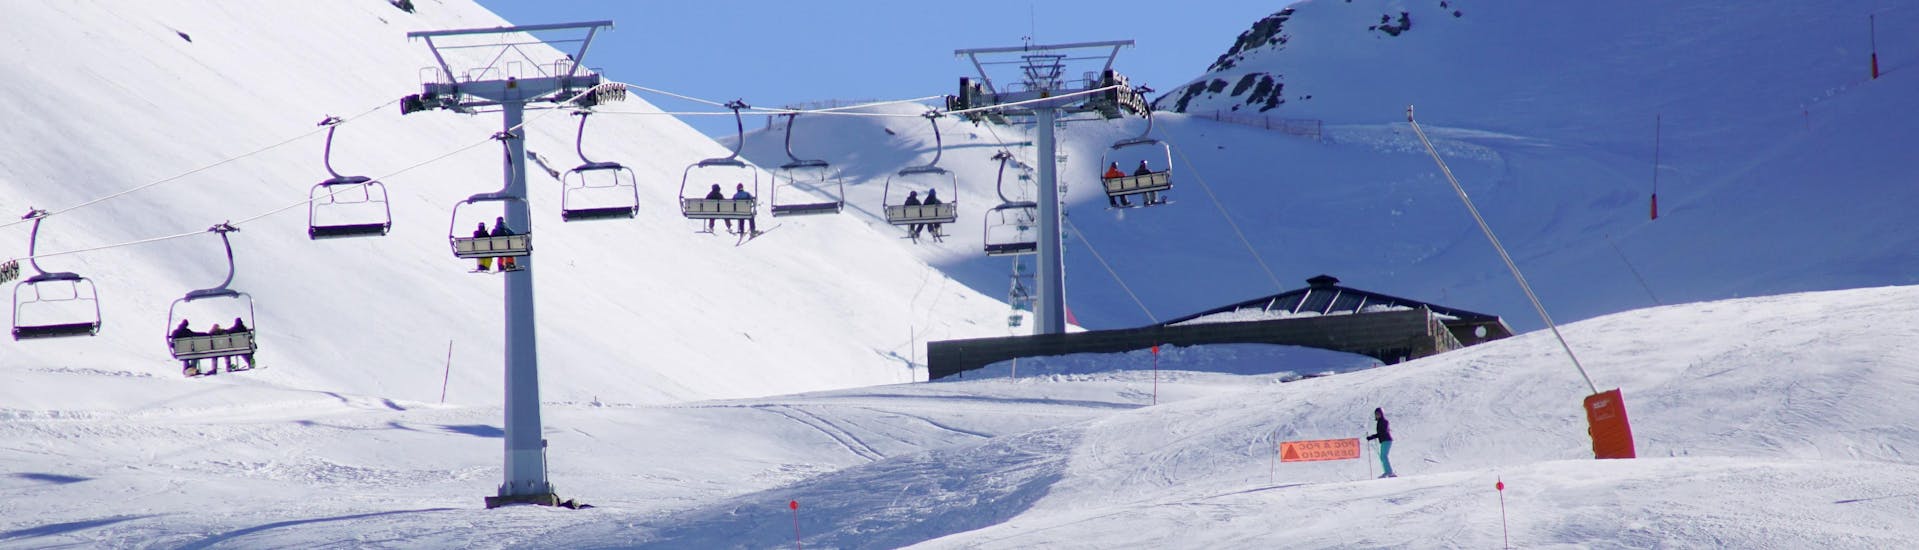 An image of one of the ski slopes in the catalan ski resort of Vall de Boí, where visitors can book ski lessons with the local ski schools.